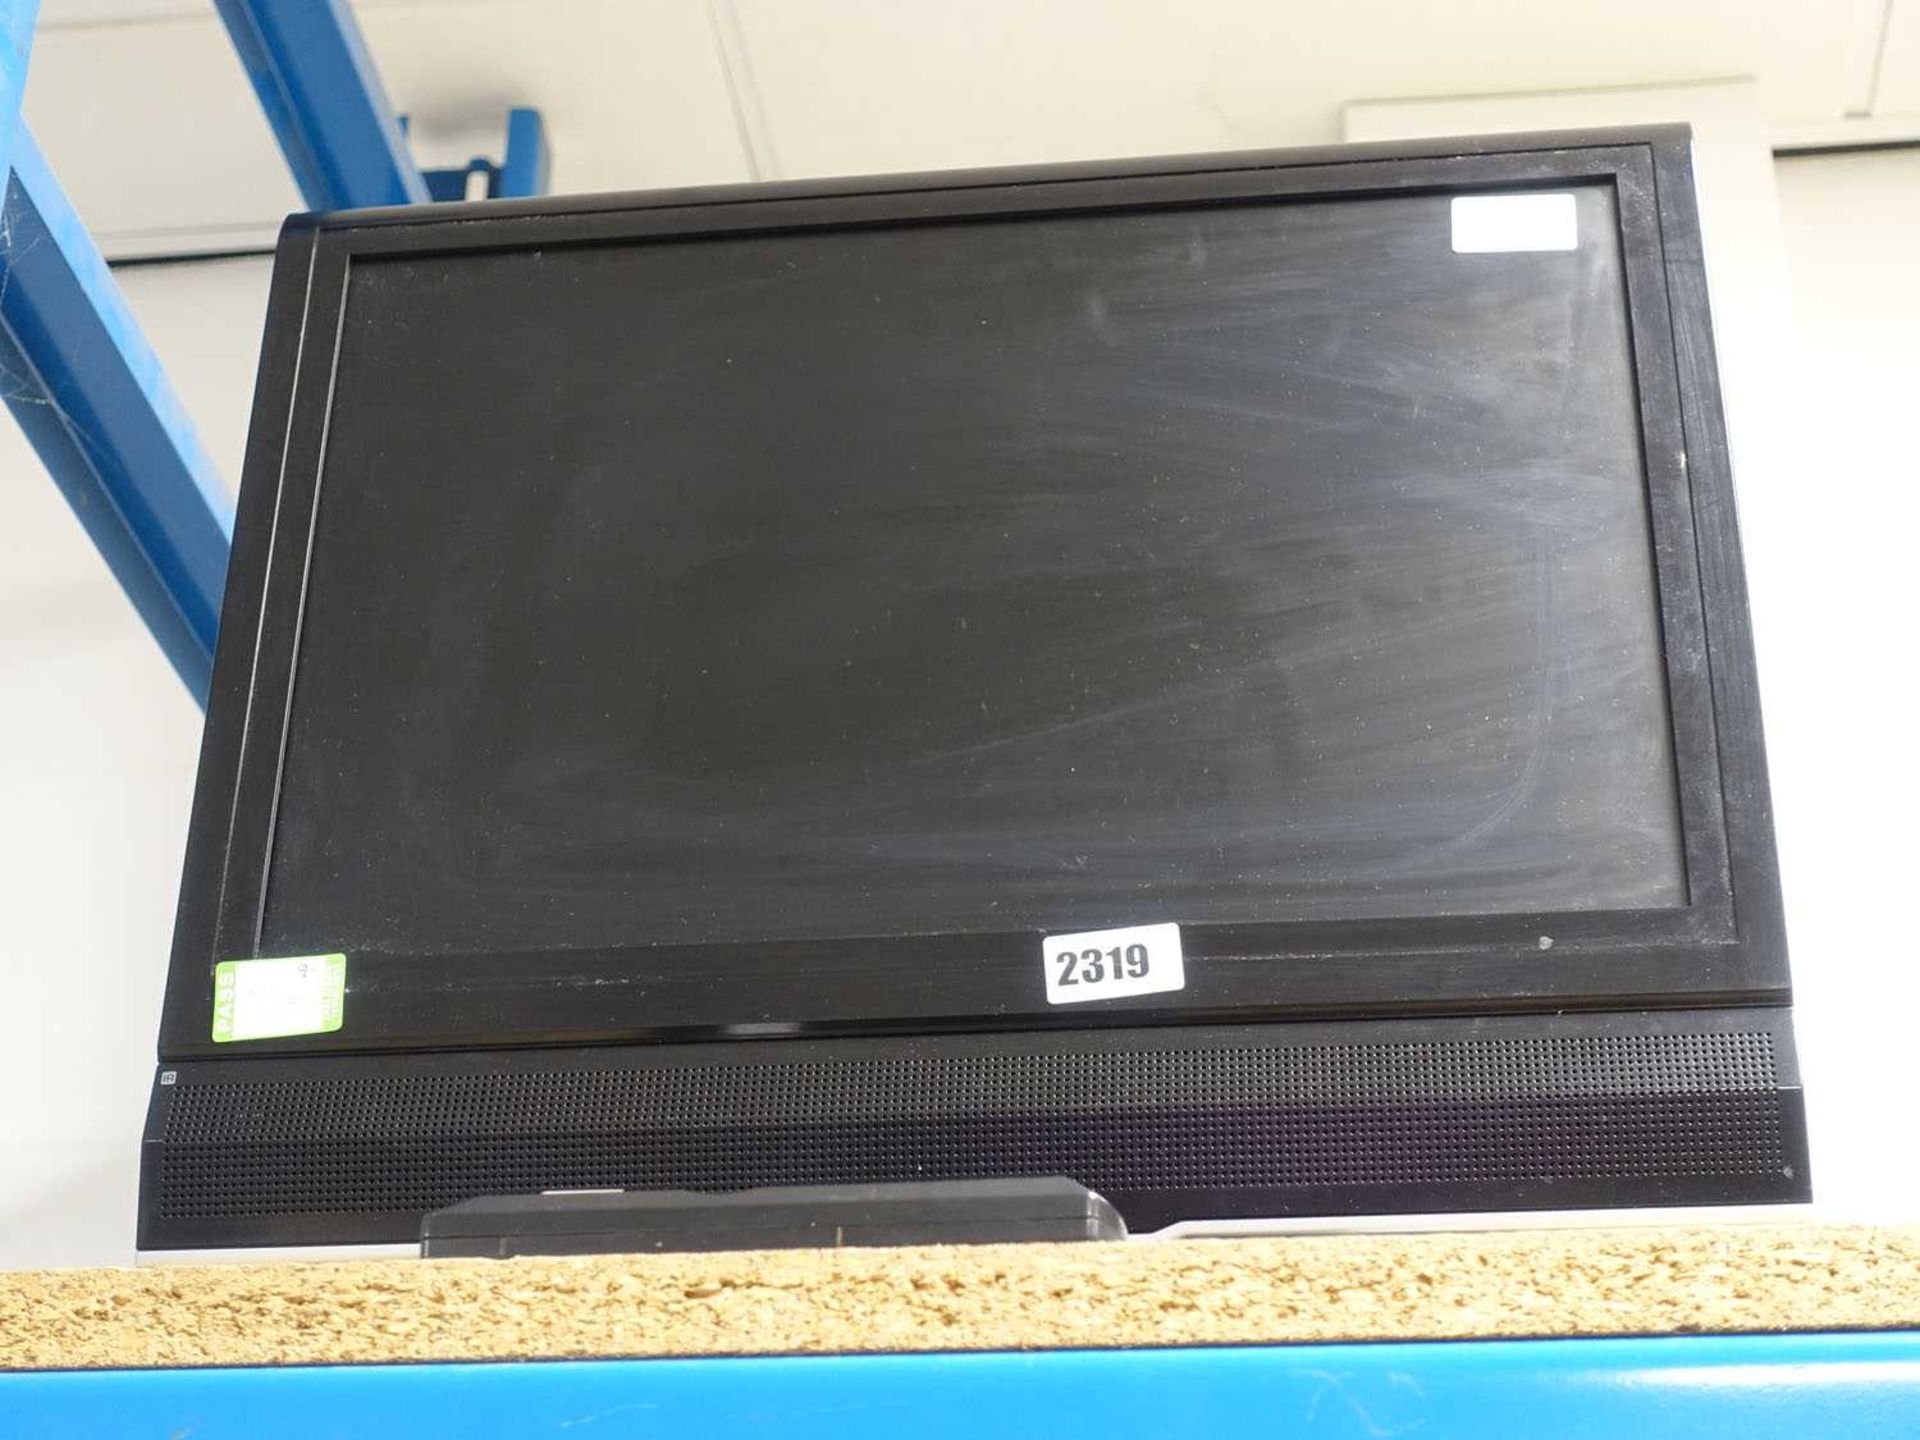 17" LCD TV set with remote